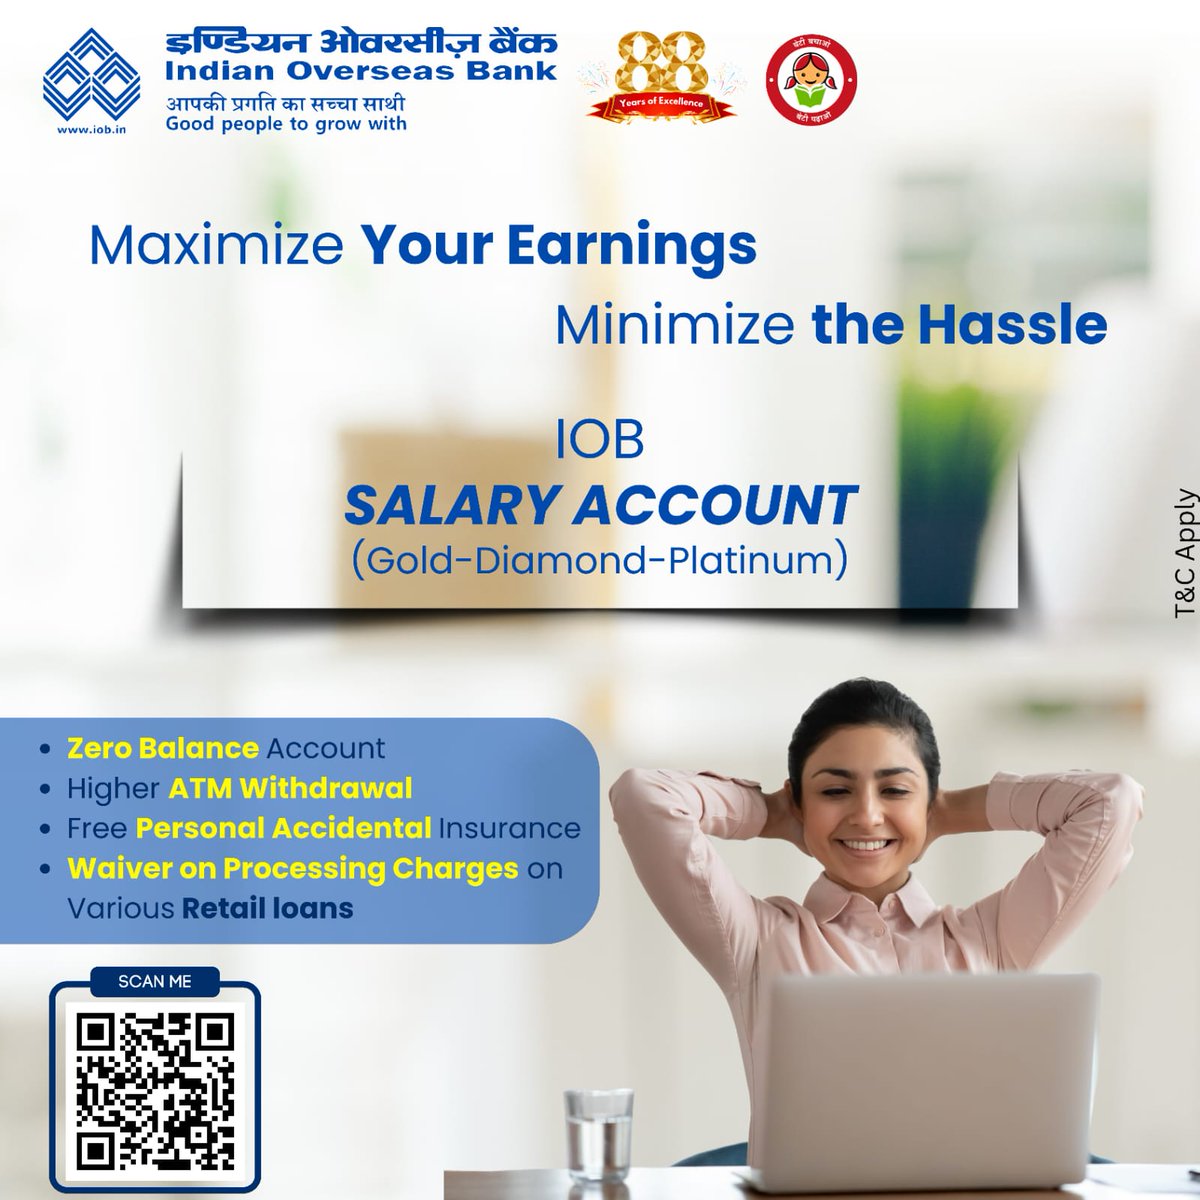 From efficient handling to exciting benefits, IOB’s SB Salary Account has got it all! Join today !!! 
iob.in/IOB-Salary-Acc…

#IndianOverseasBank #dfs #RBI #KYC #AccountOpening #salaryaccount #savingsaccount #savings #DigitalAccount #UniqueFeatures #nilcharges #zerobalance